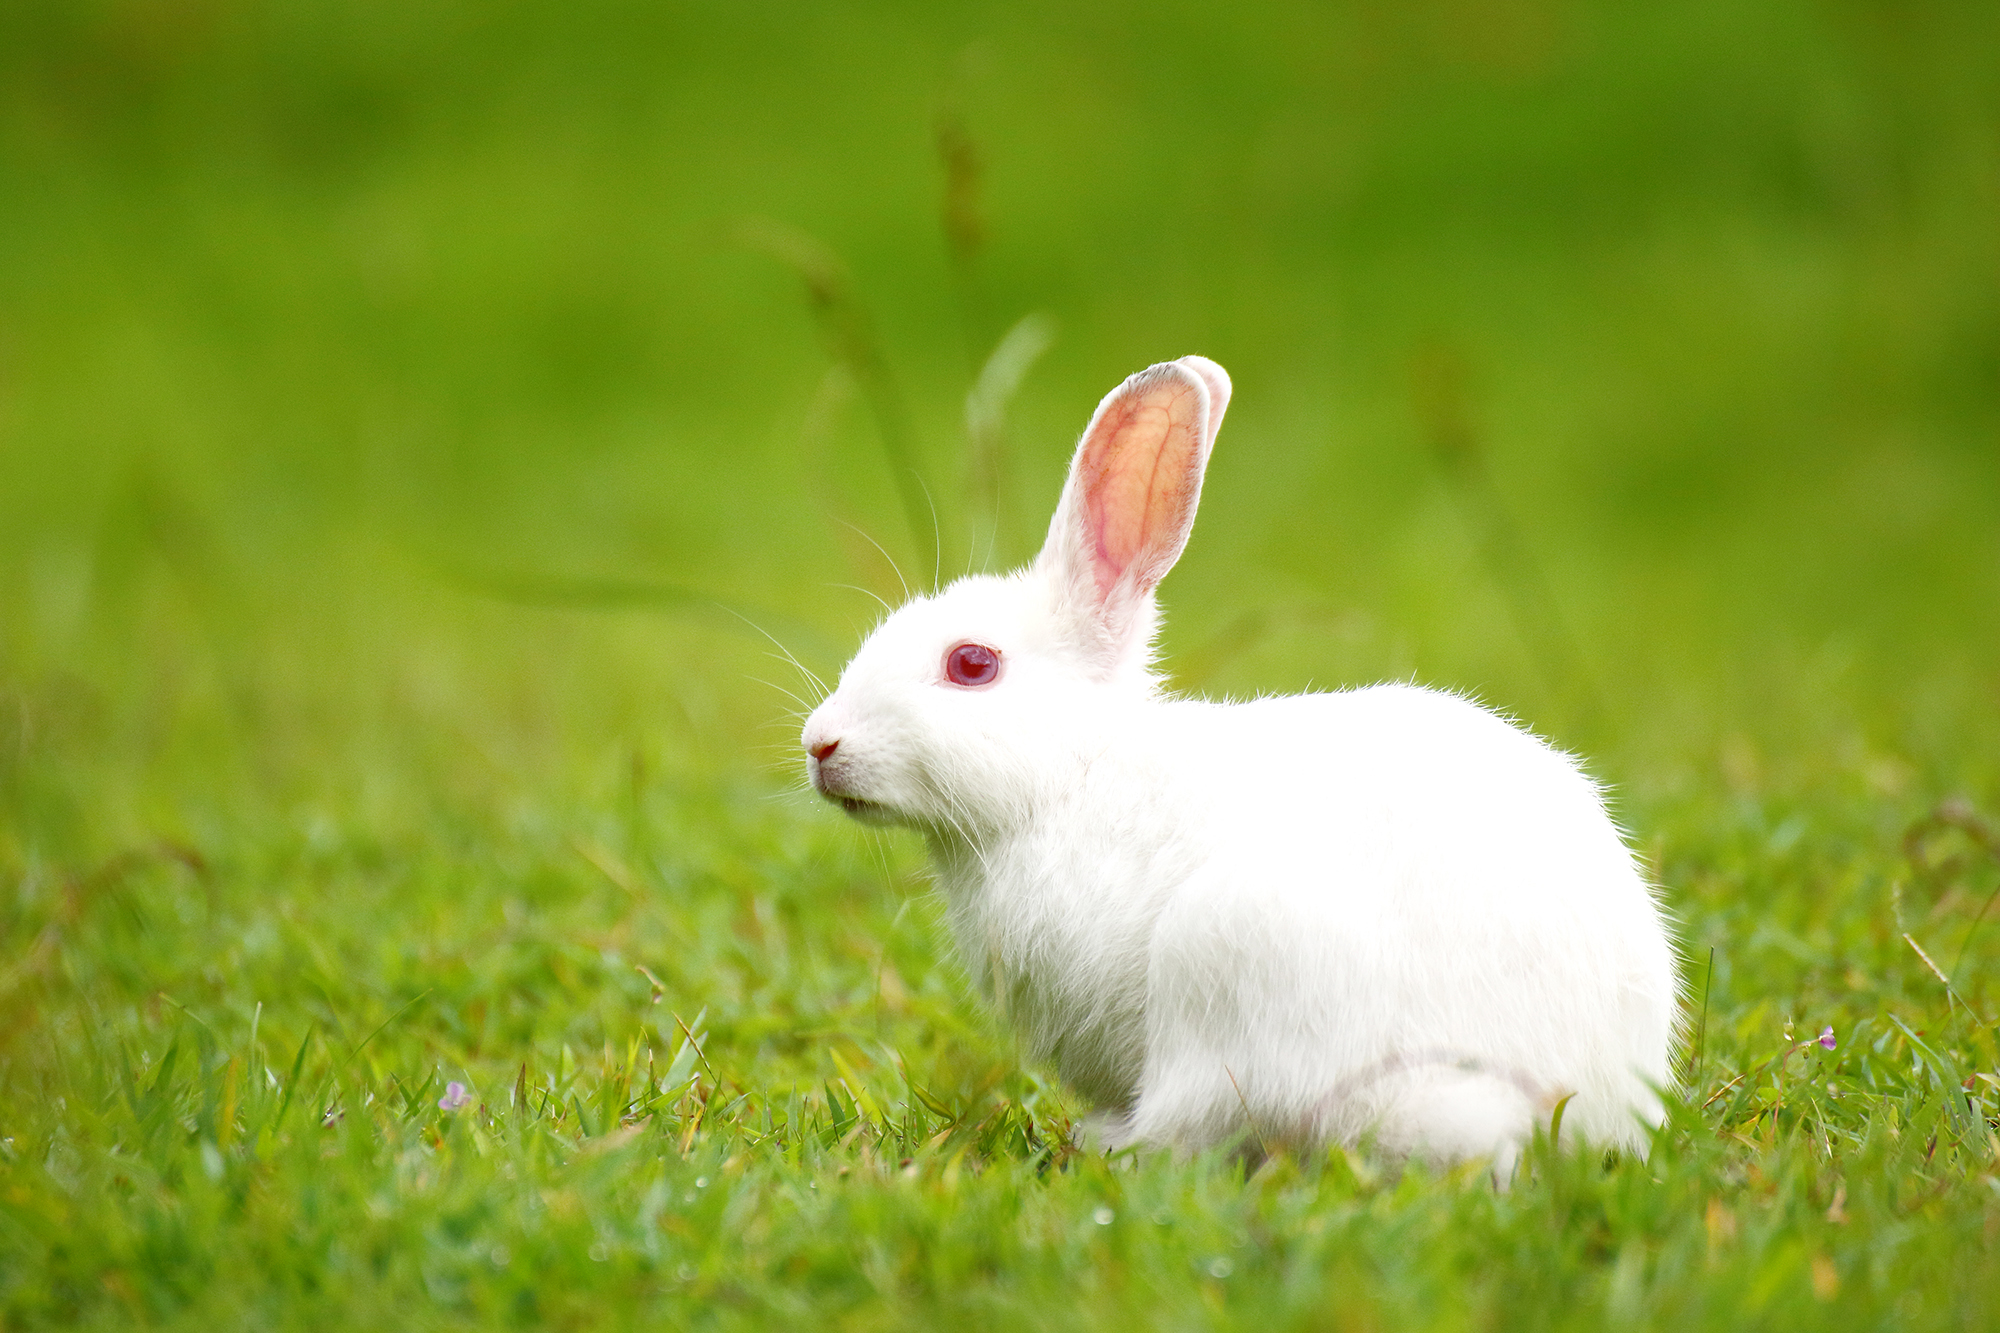 The Reason Why Rabbits Show Up in Horror Movies Like Us | Time